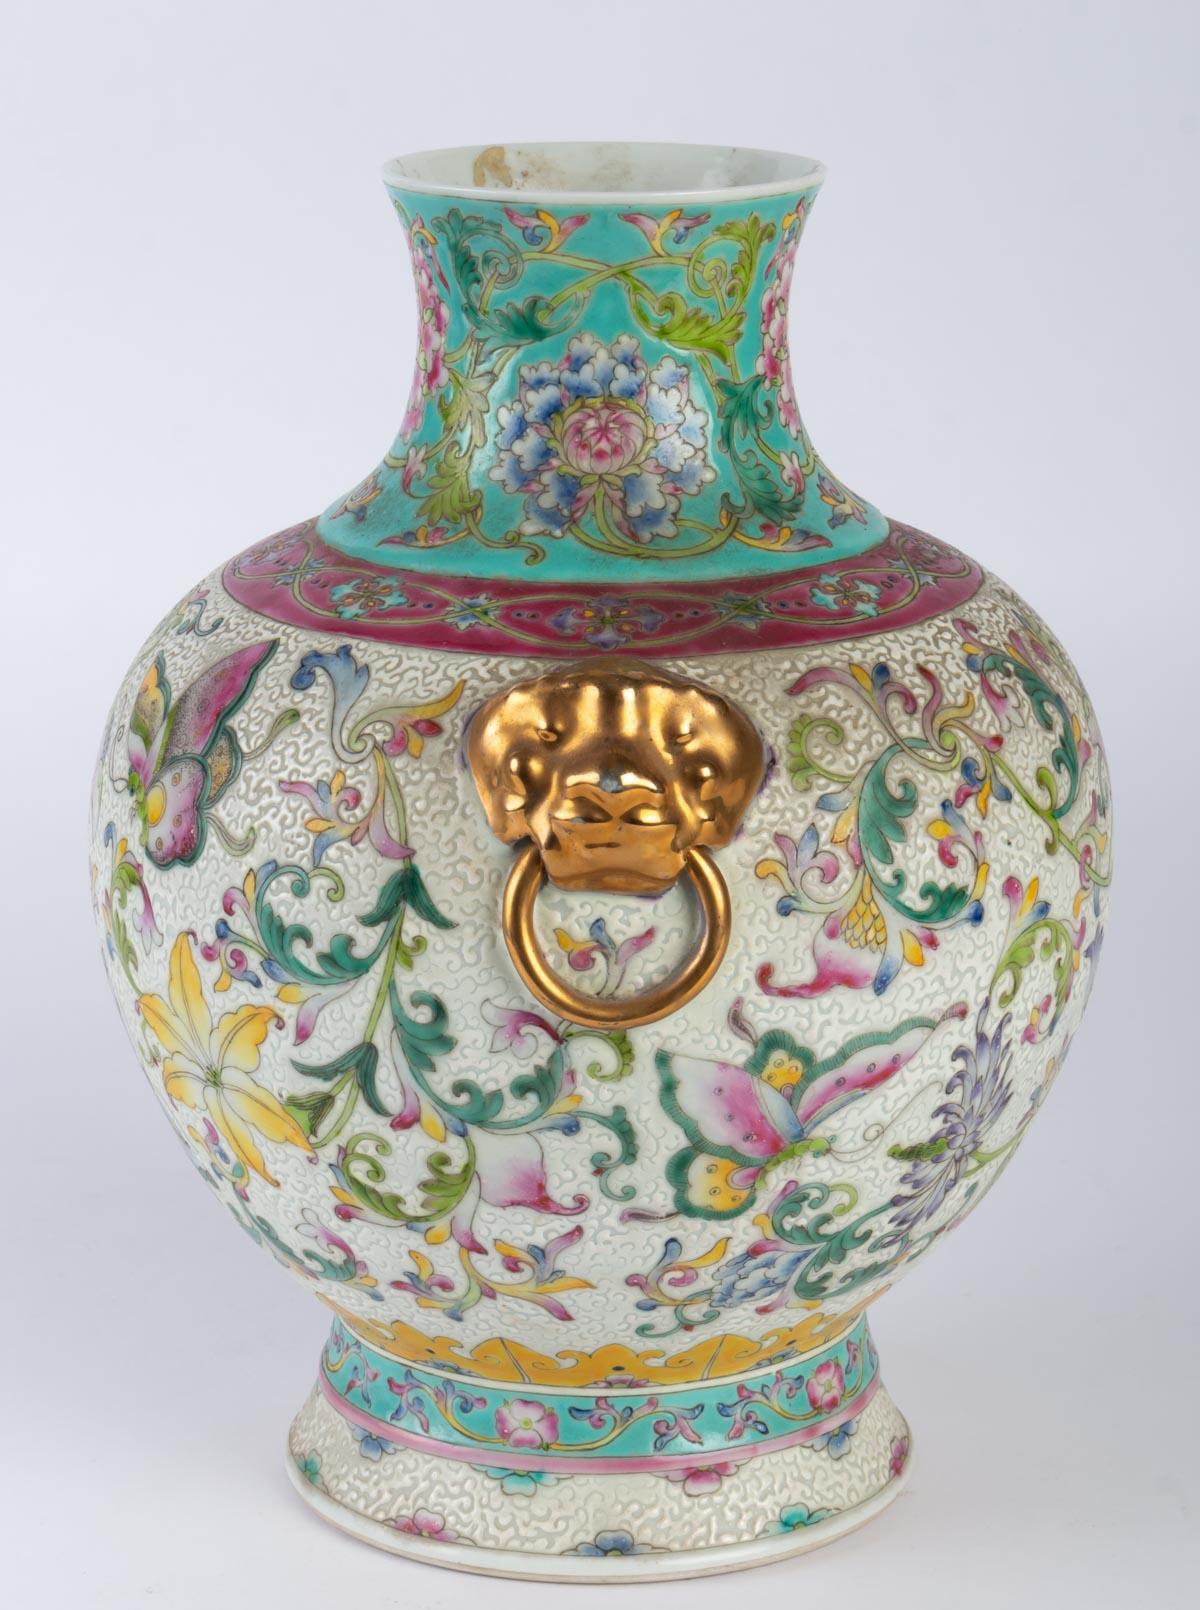 Mid-20th Century Porcelain Vase Decorated with Floral Scrolls